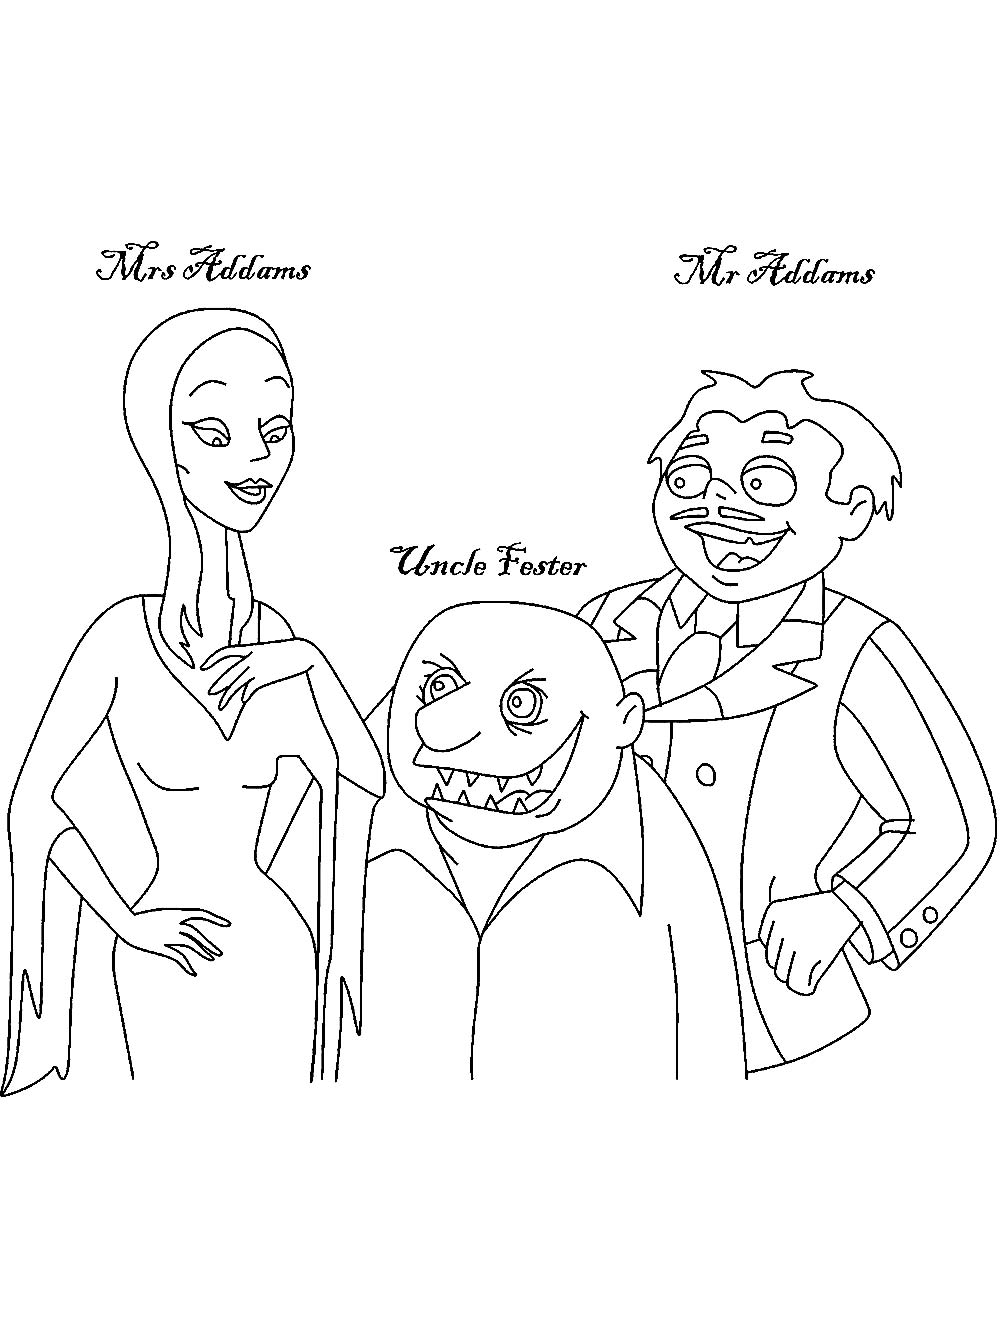 The Addams Family coloring page - Free printable